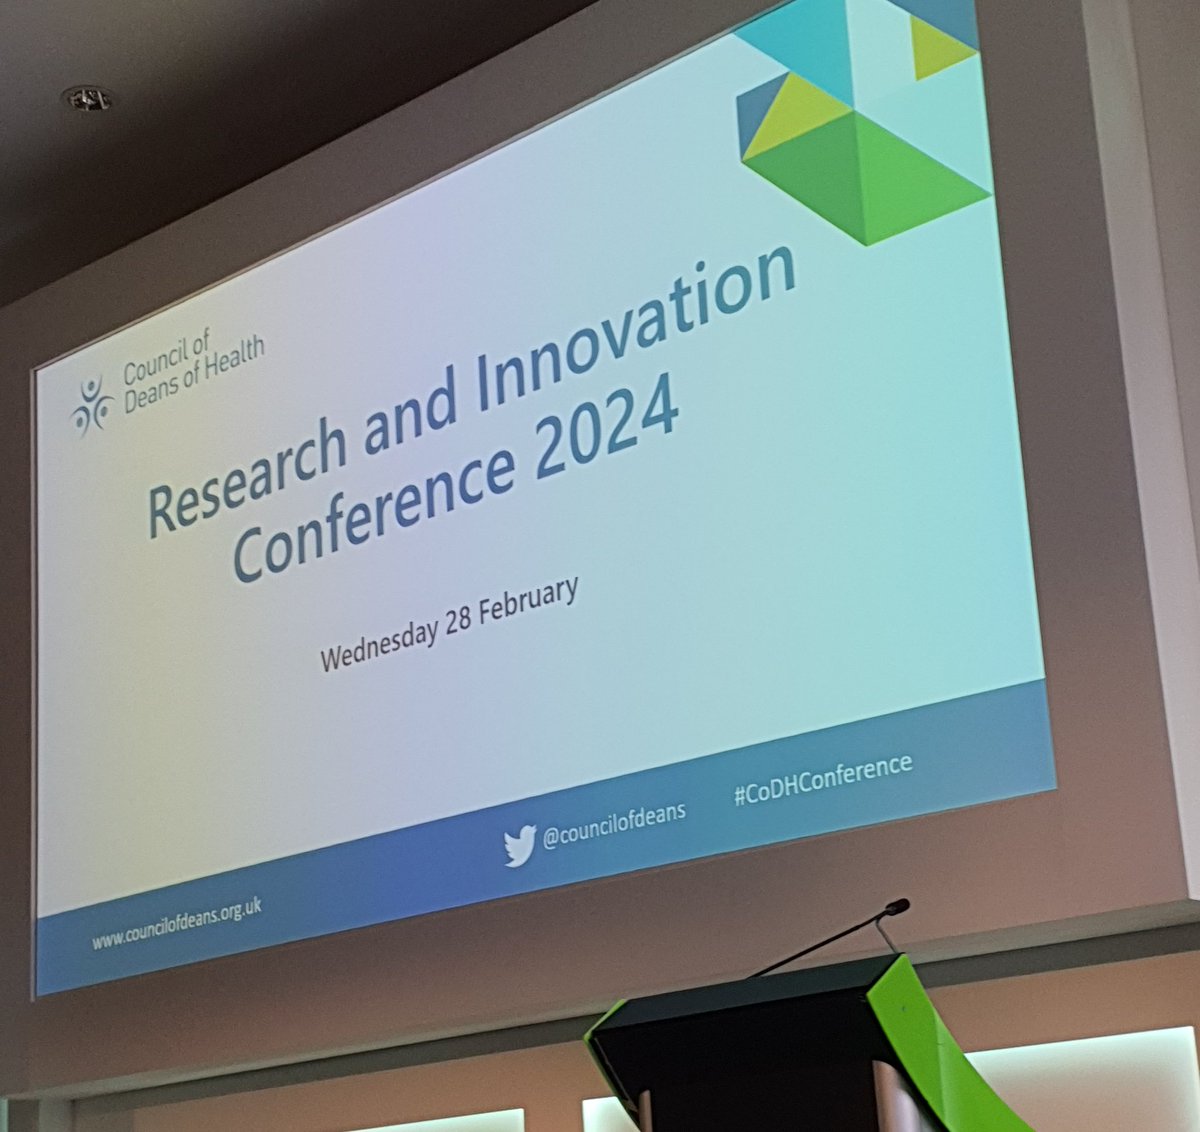 First time for @rschconsulting at the @councilofdeans' Research and Innovation Conference, looking forward to the sessions #codhconference